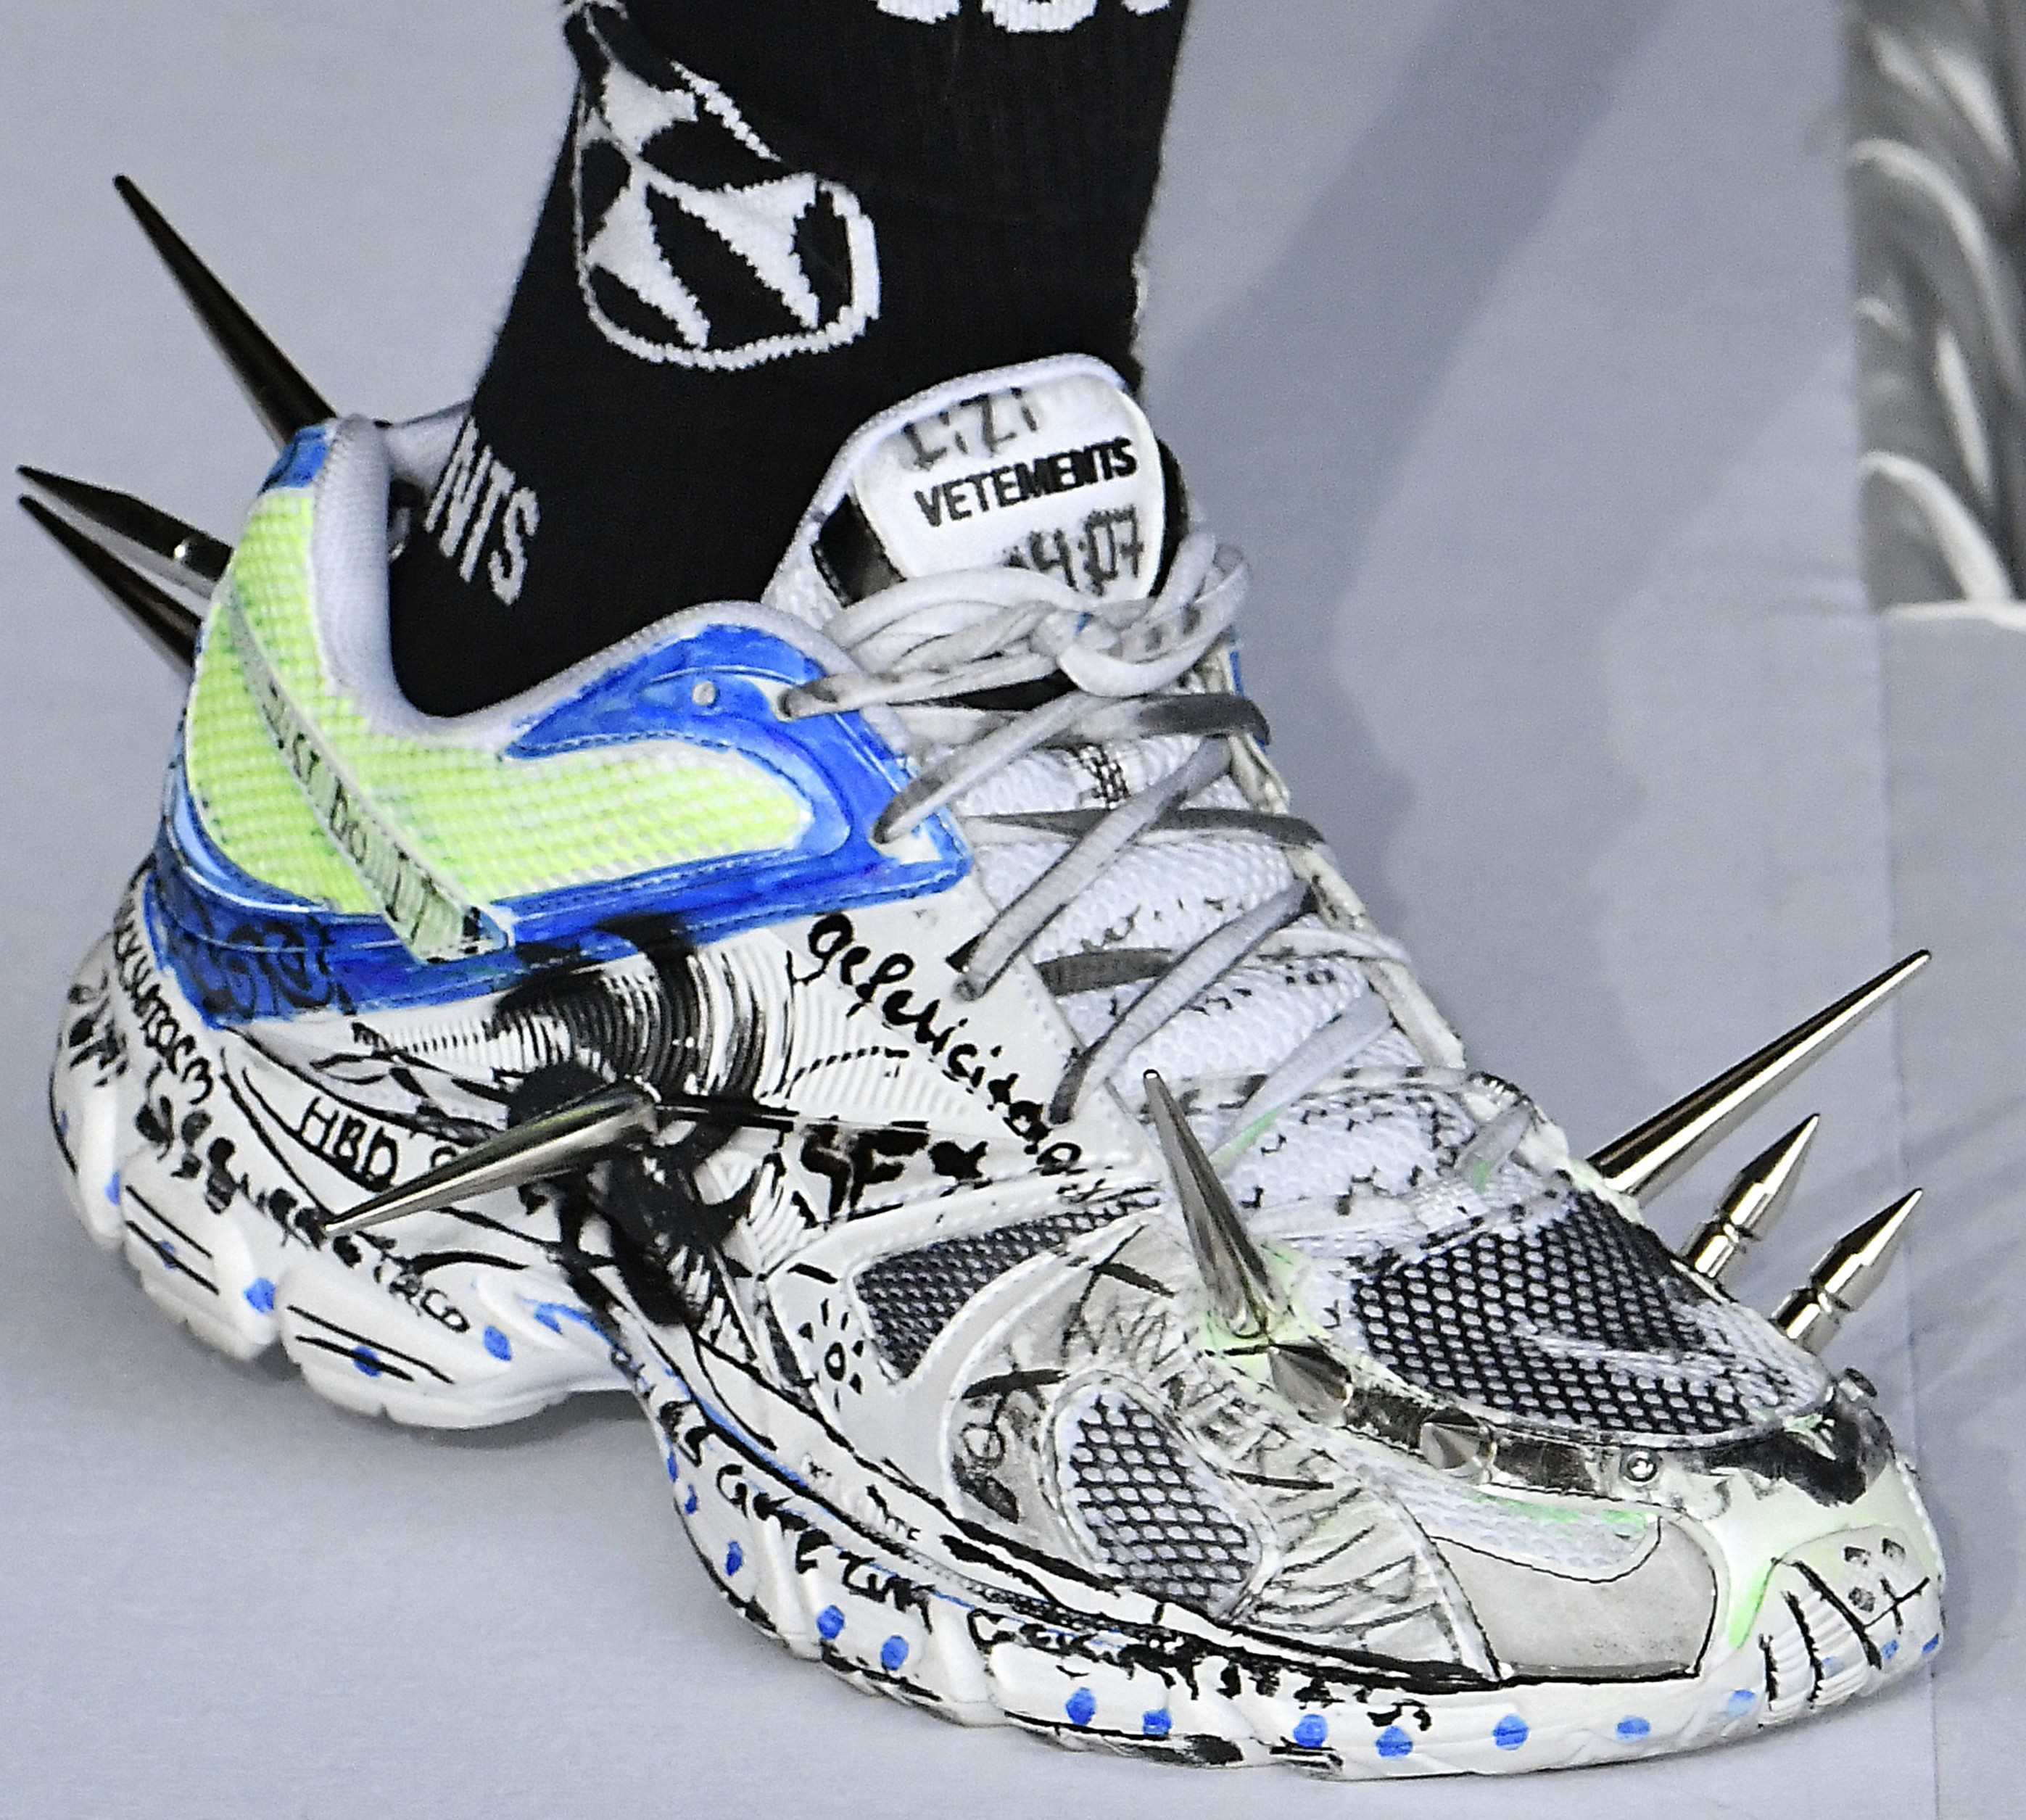 The Reebok x Vetements Sneakers Covered in Doodles Are Really Pricey